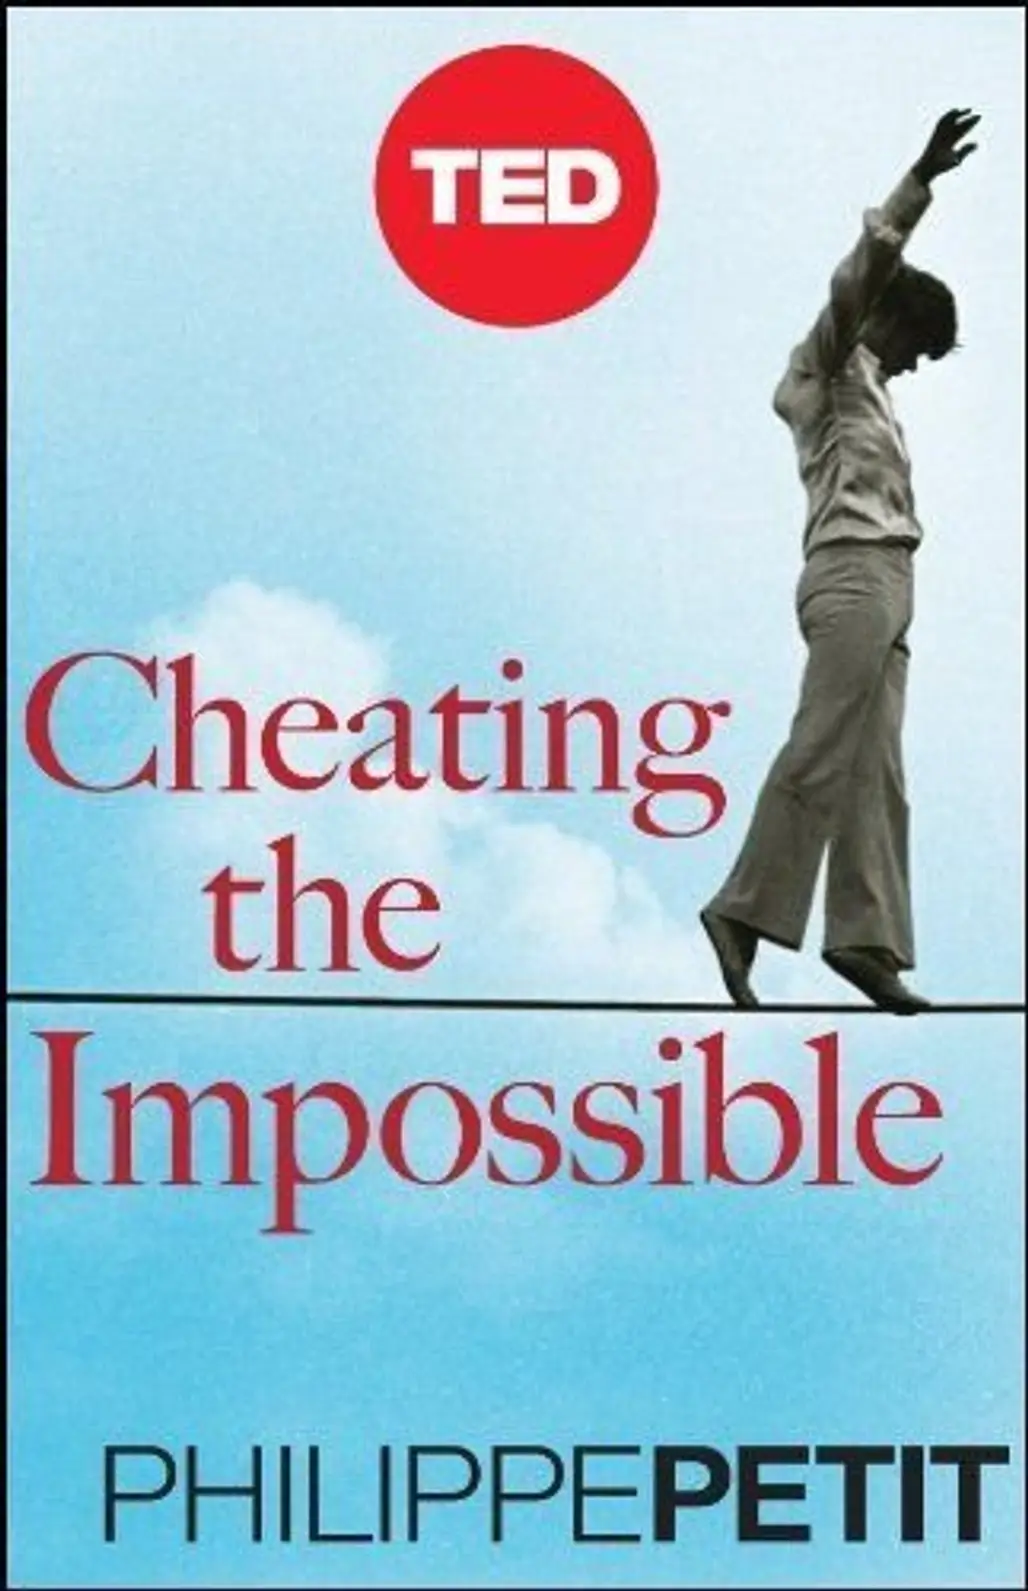 Cheating the Impossible by Philippe Petit